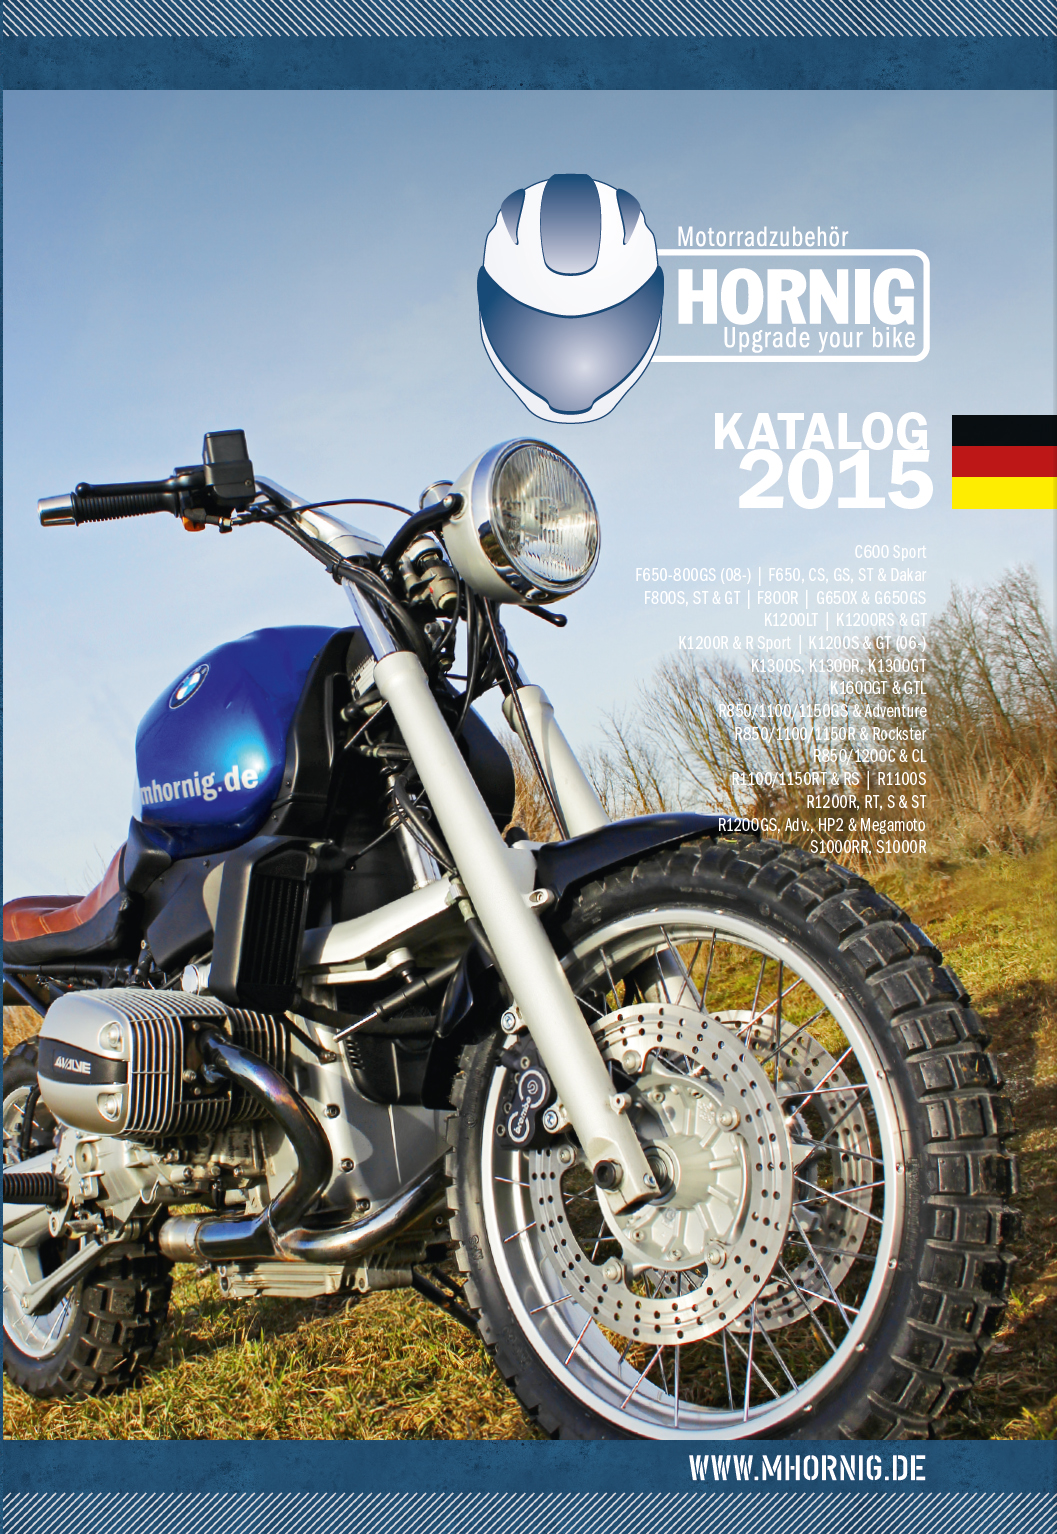 BMW Motorcycle Accessory Catalogue 2015 by Hornig download or preorder